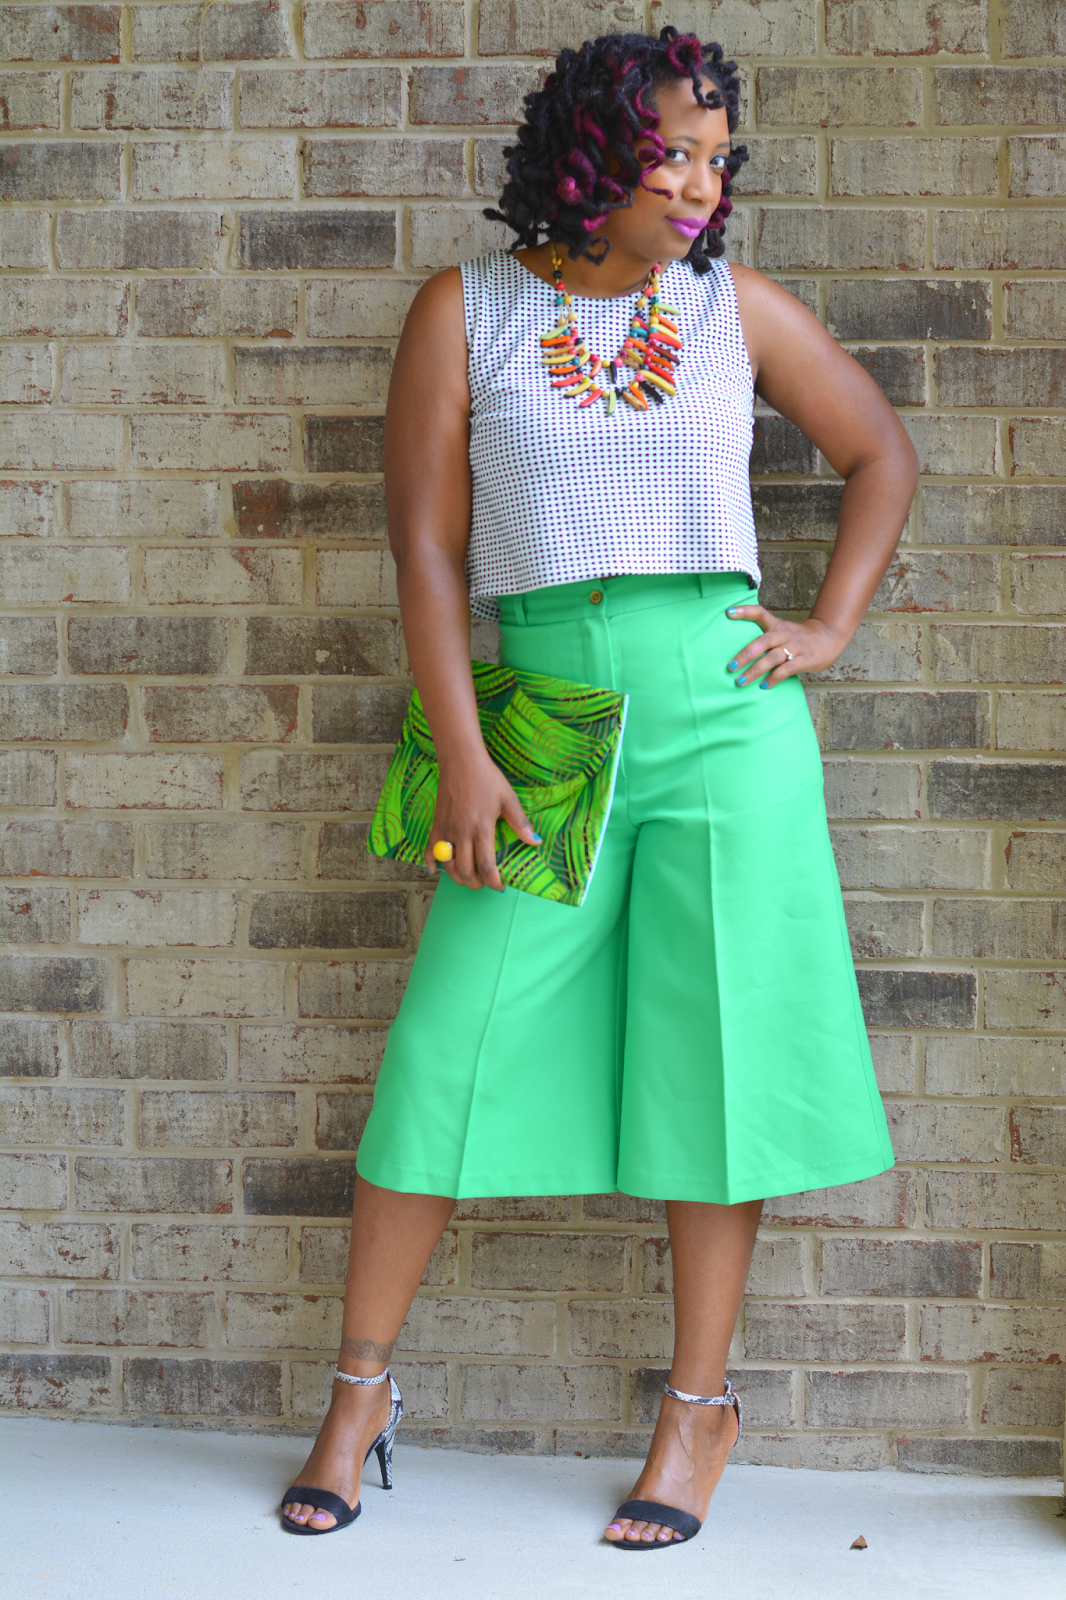 culottes outfit ideas